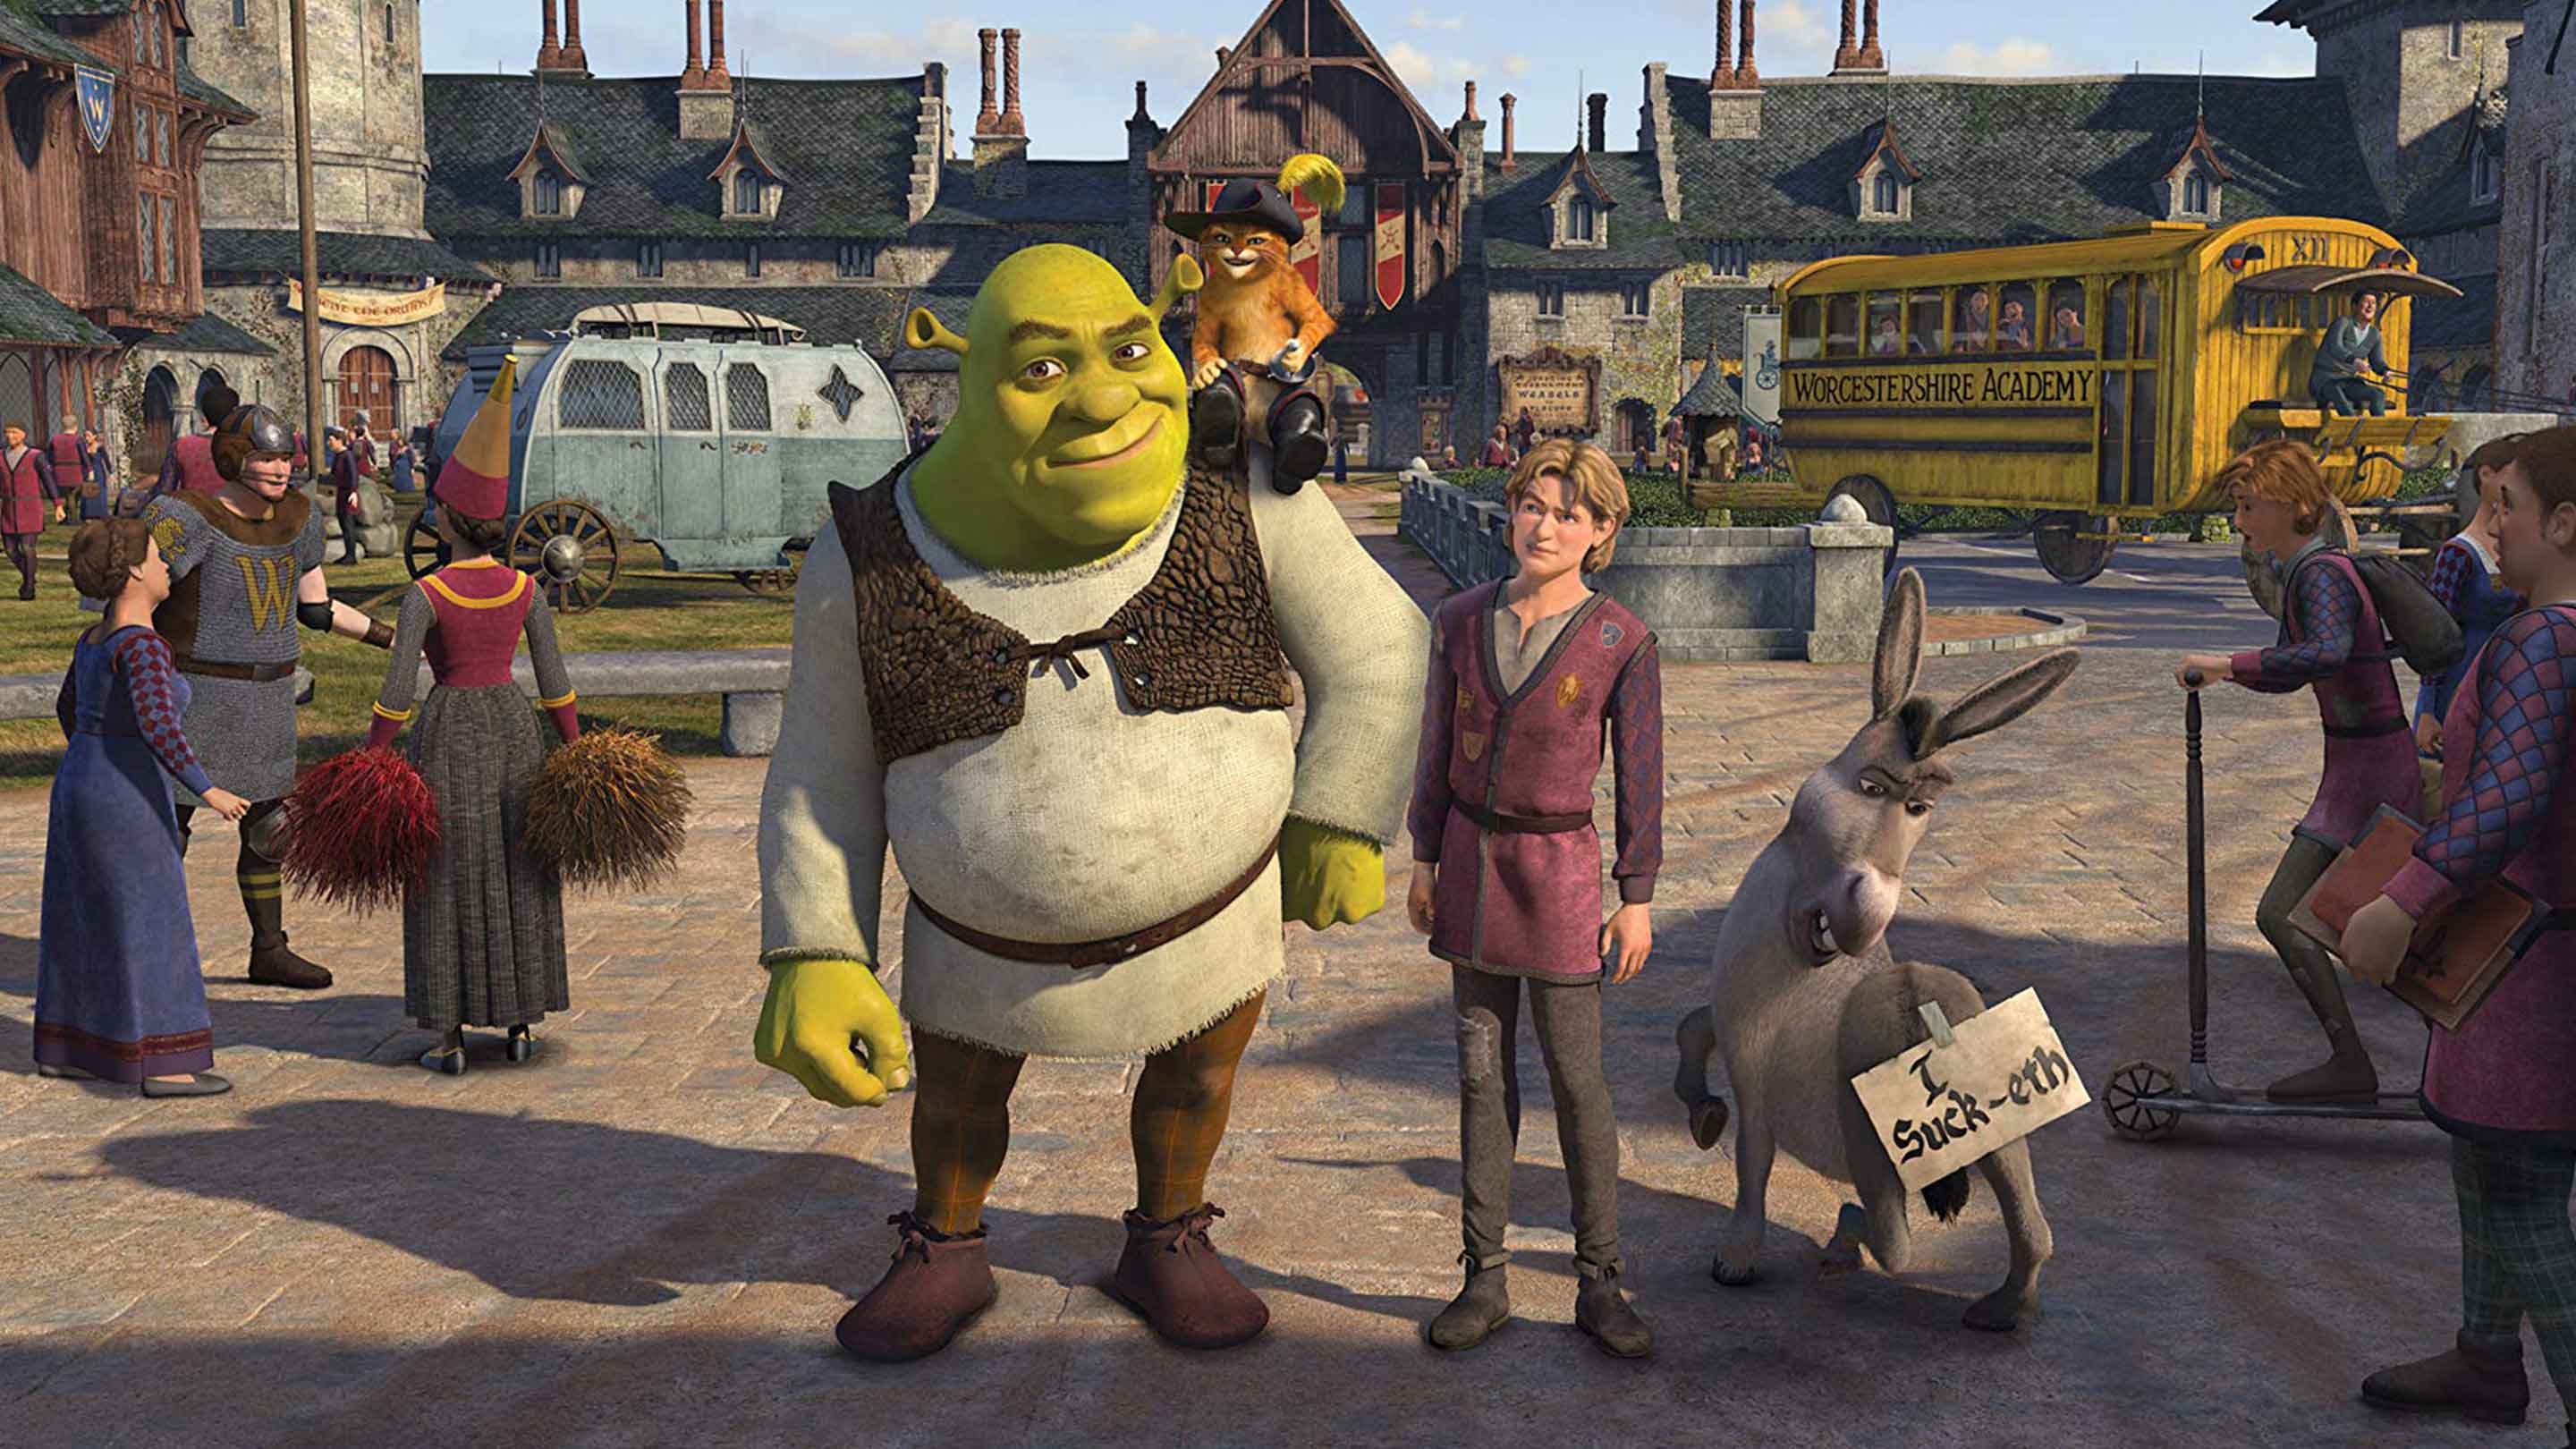 Shrek stands in a town square.